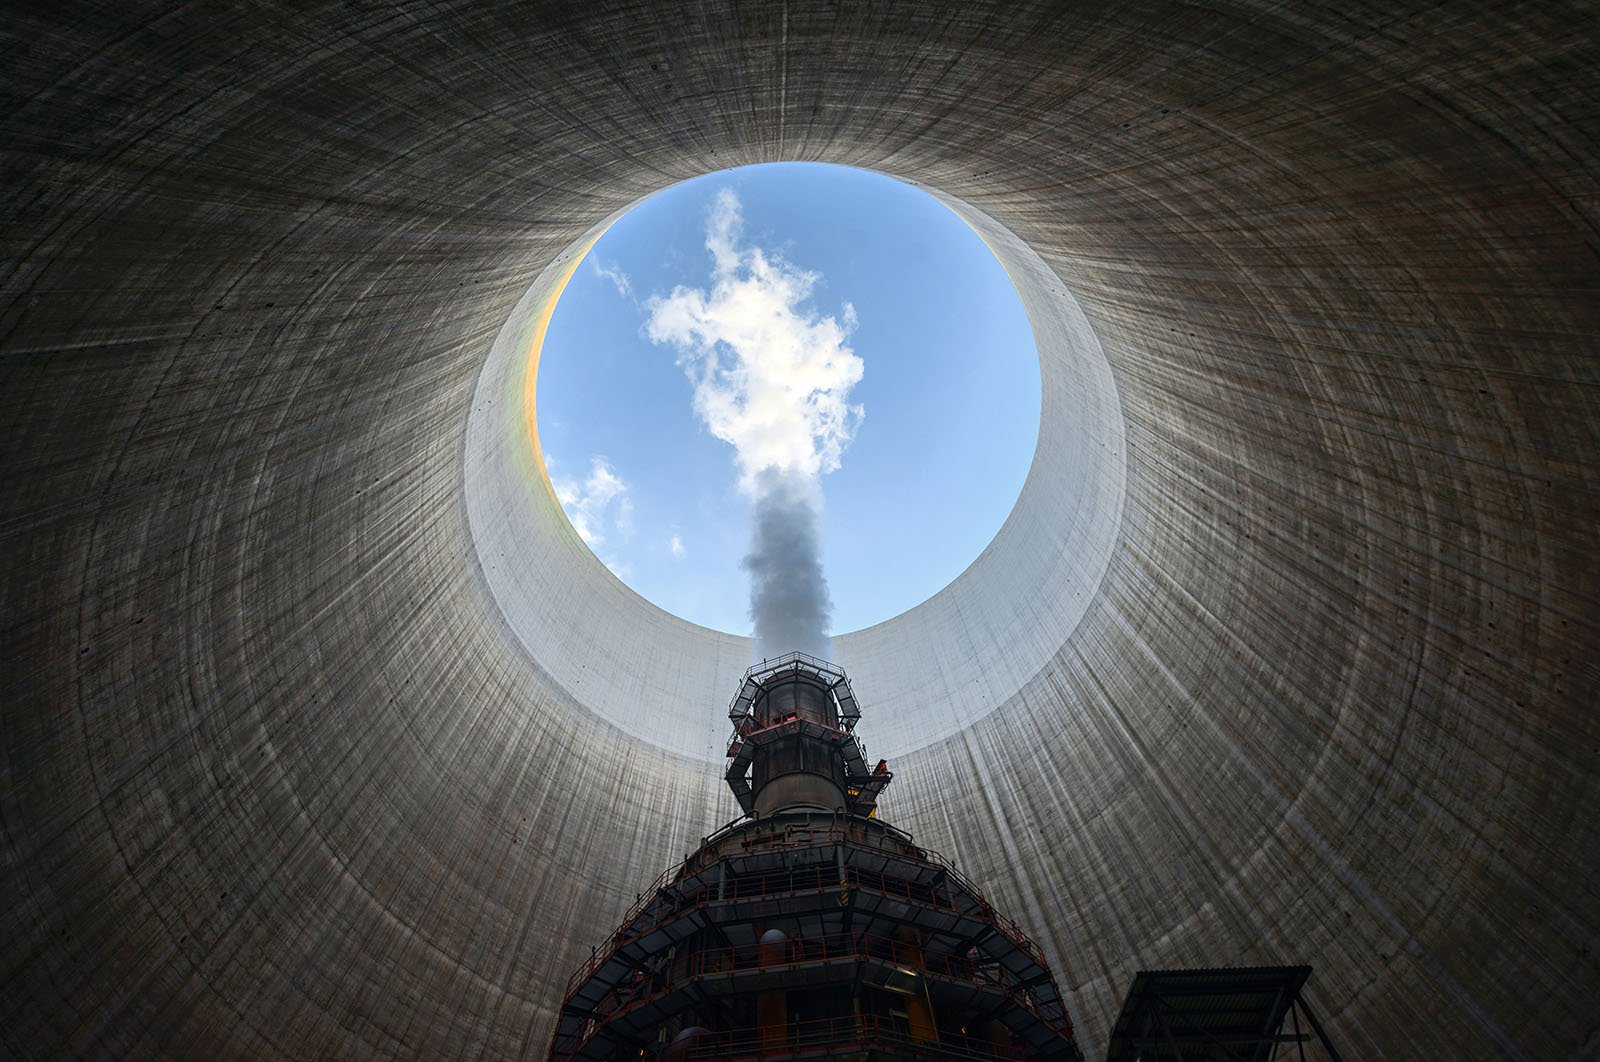 Inspection of a Nuclear Power Plant